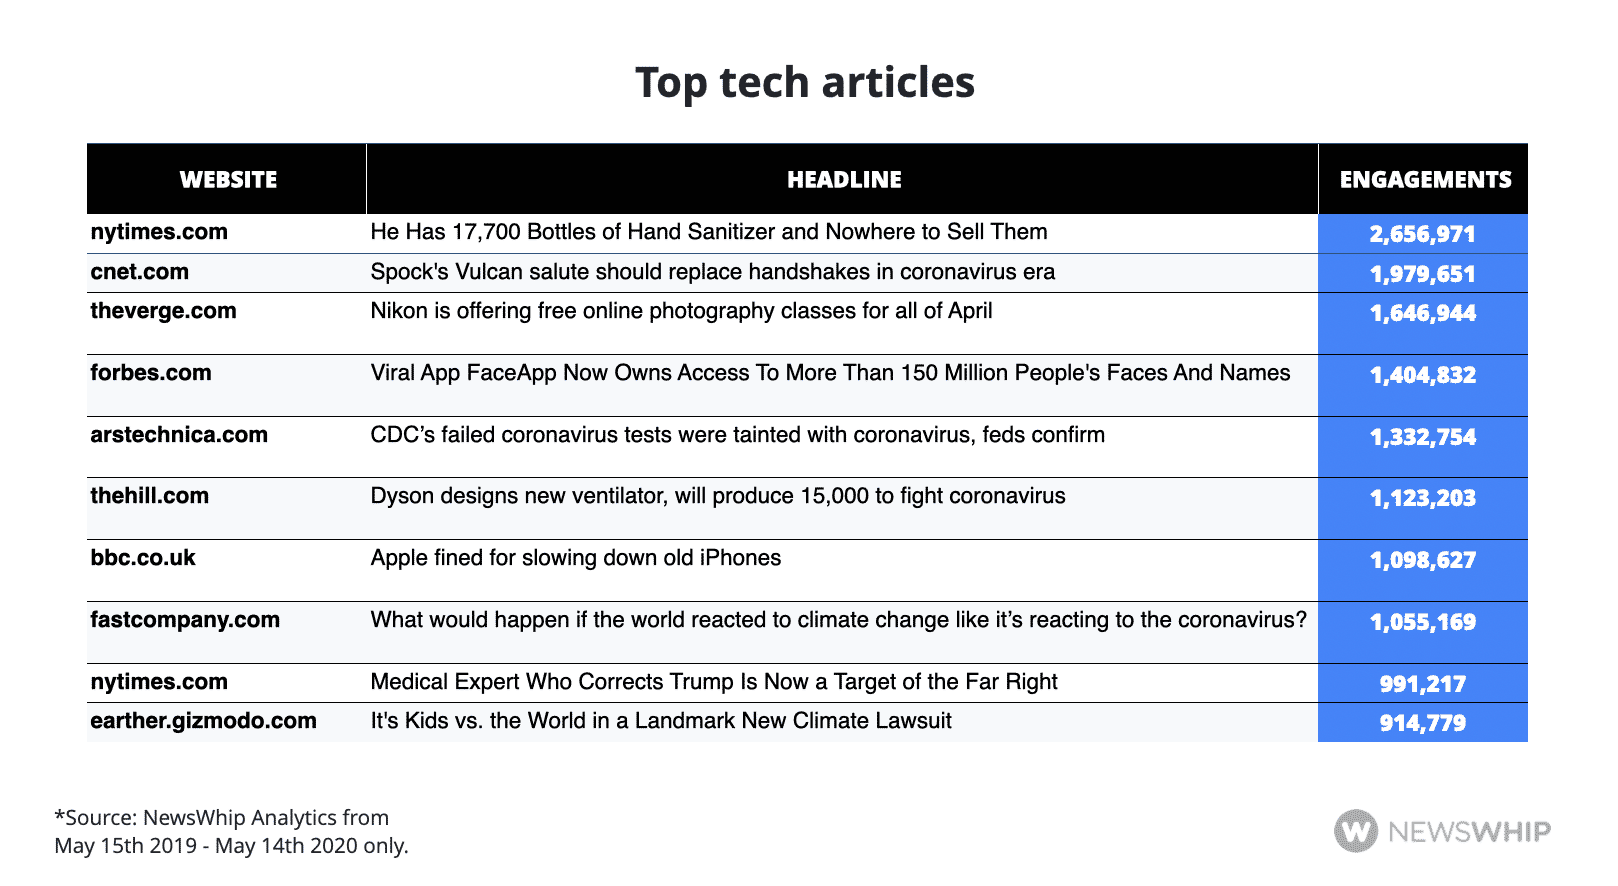 Chart showing the most engaged tech articles of the last year